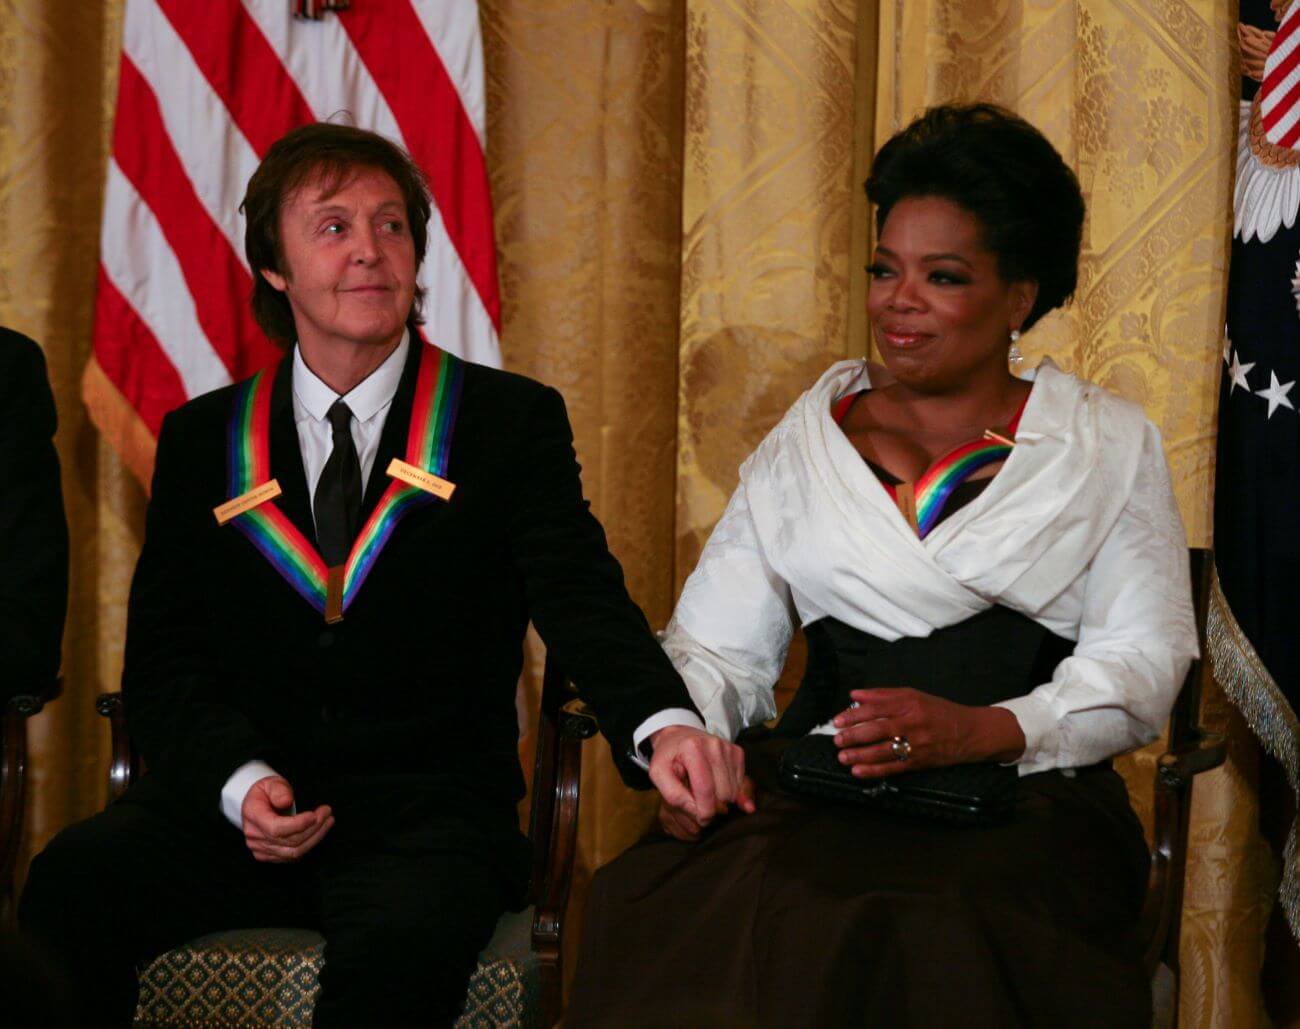 Oprah Winfrey and Paul McCartney hold hands while sitting next to each other. Both wear rainbow ribbons.